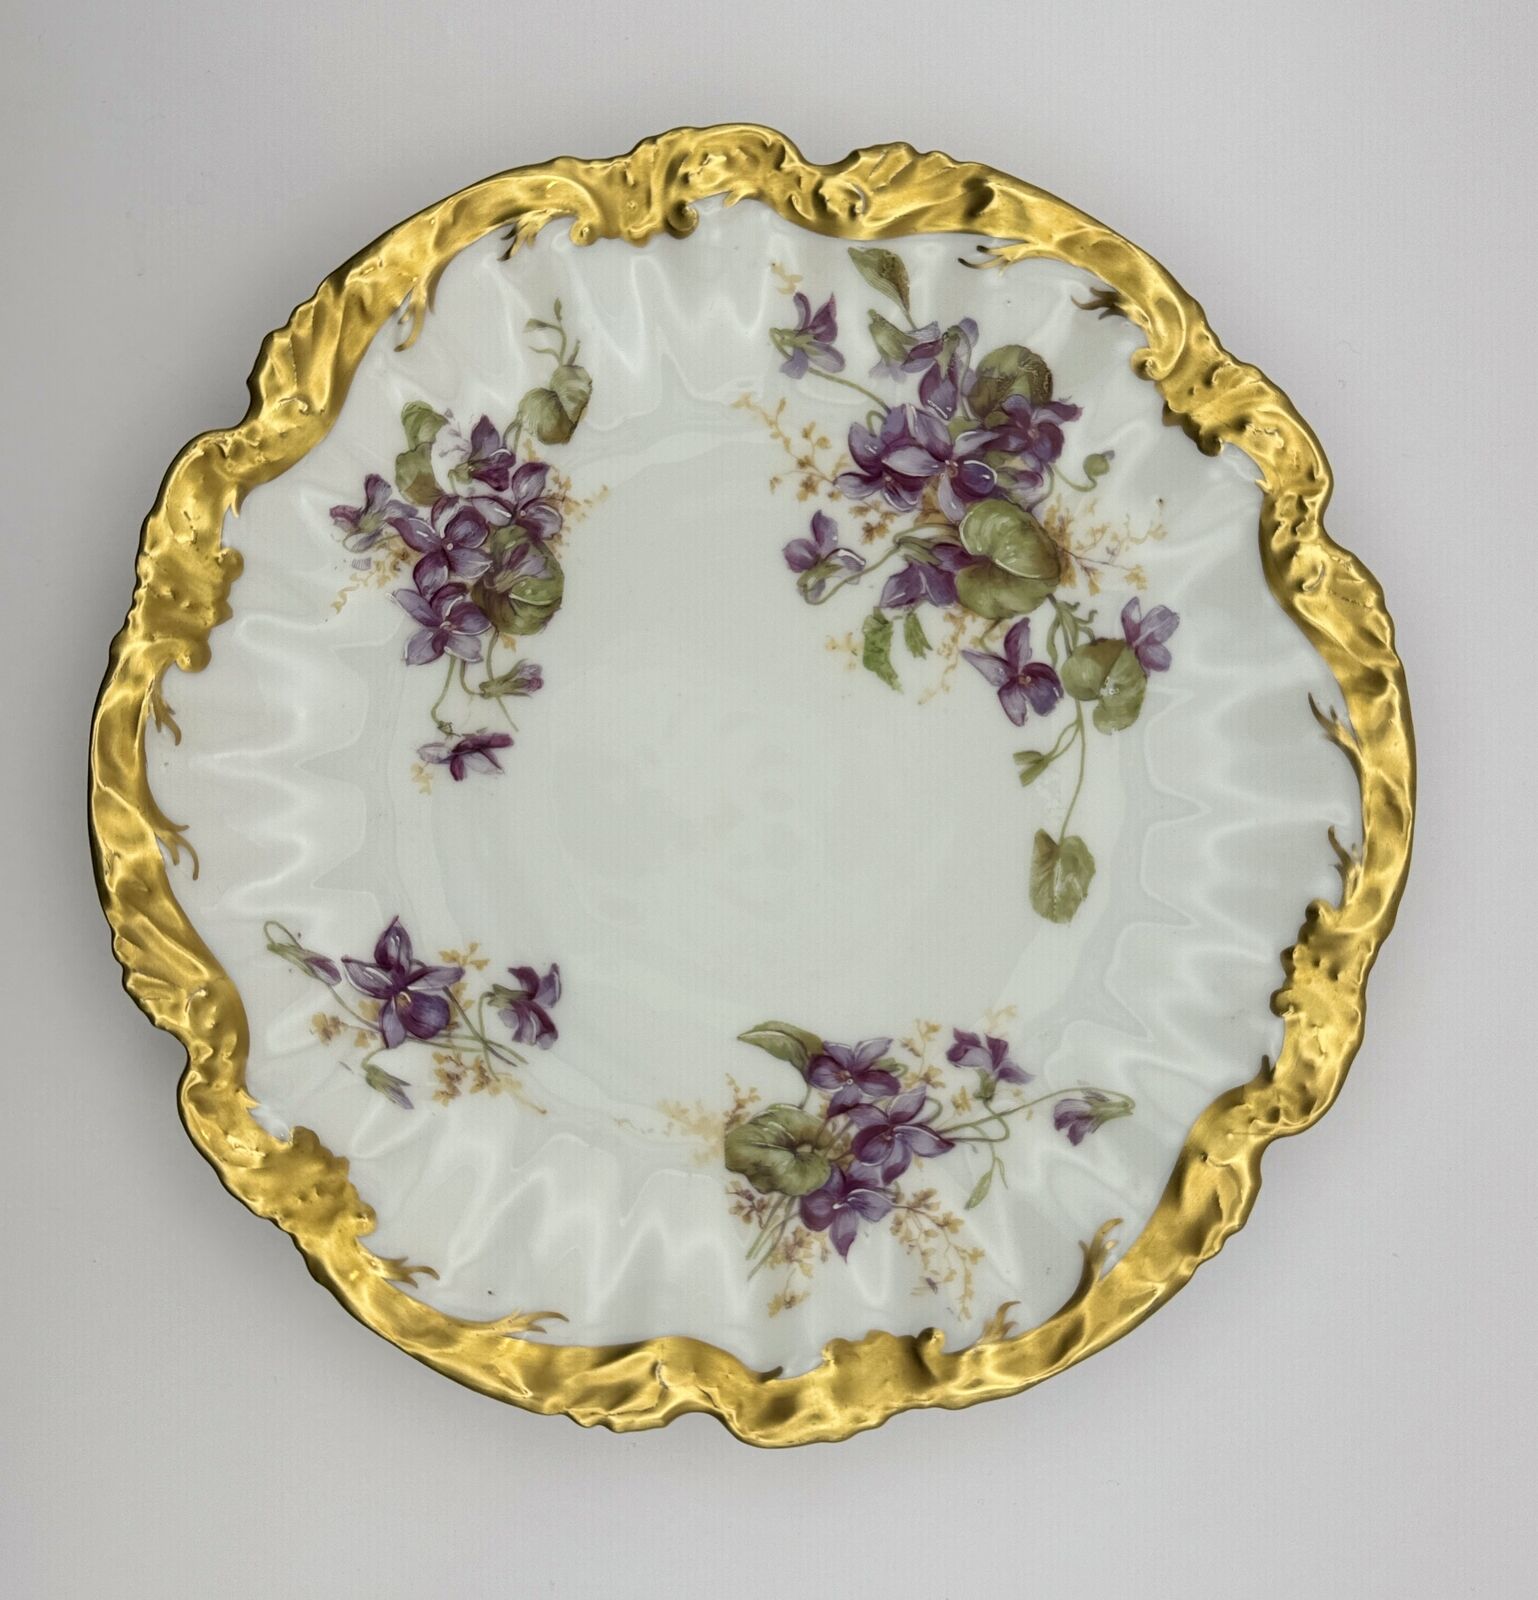 Coronet Limoges France Porcelain Plate with Gold Trim and Floral Design